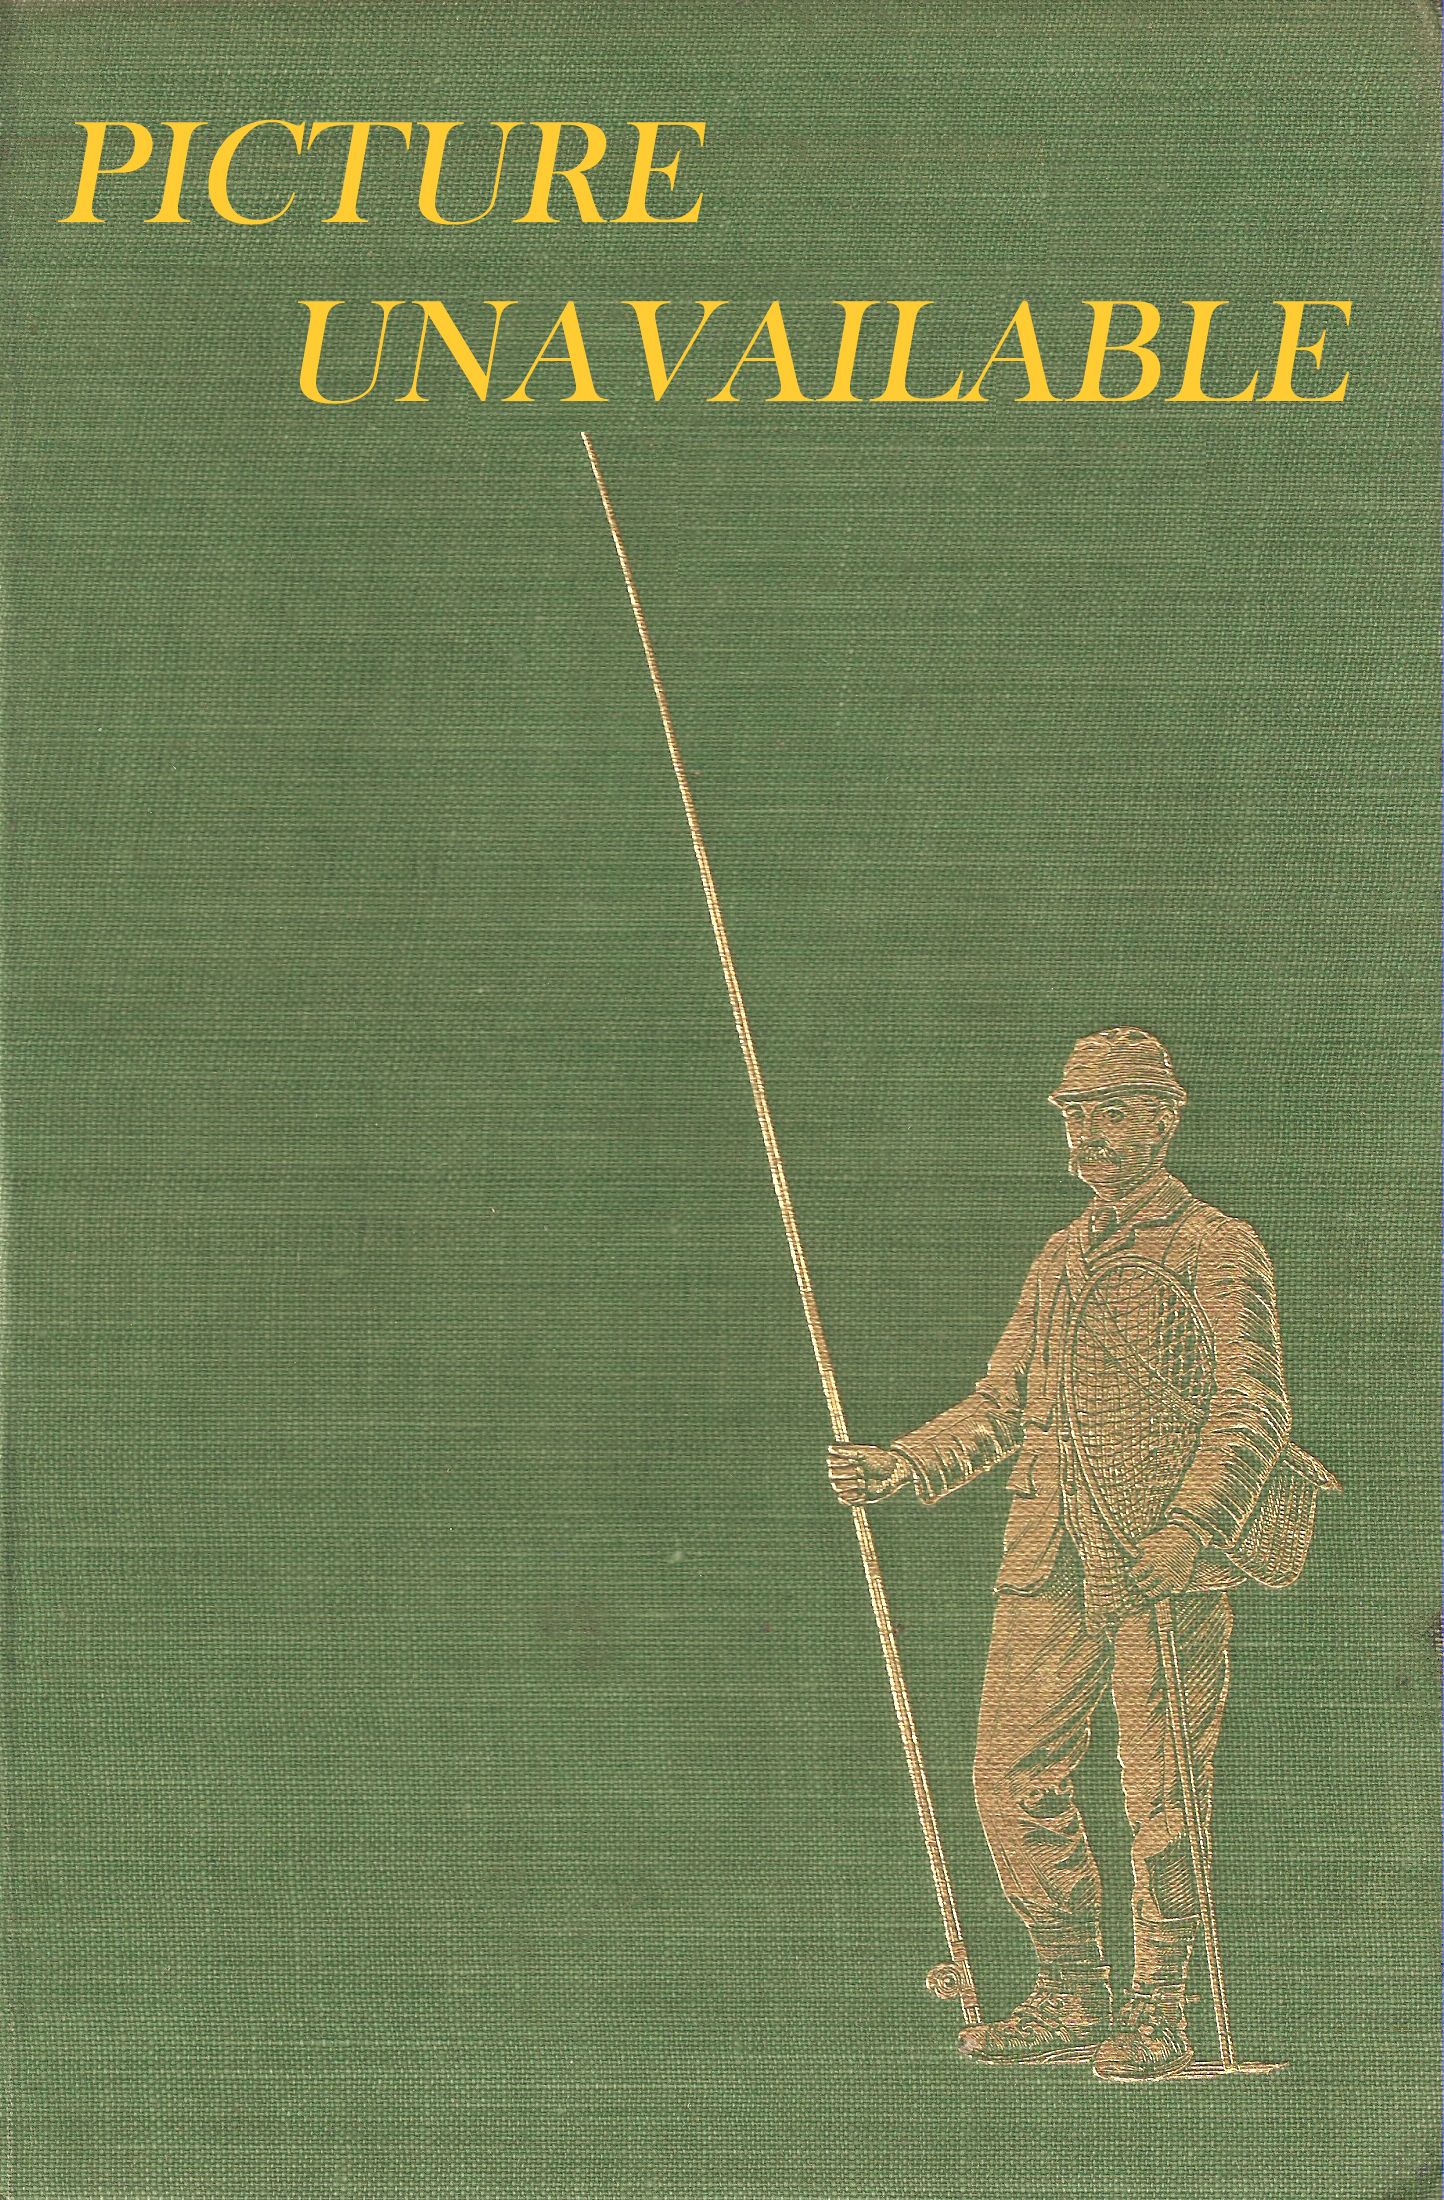 THE COMPLETE GUIDE TO SEA ANGLING. Edited and compiled by Alan Wrangles.  Illustrated by David Carl Forbes.